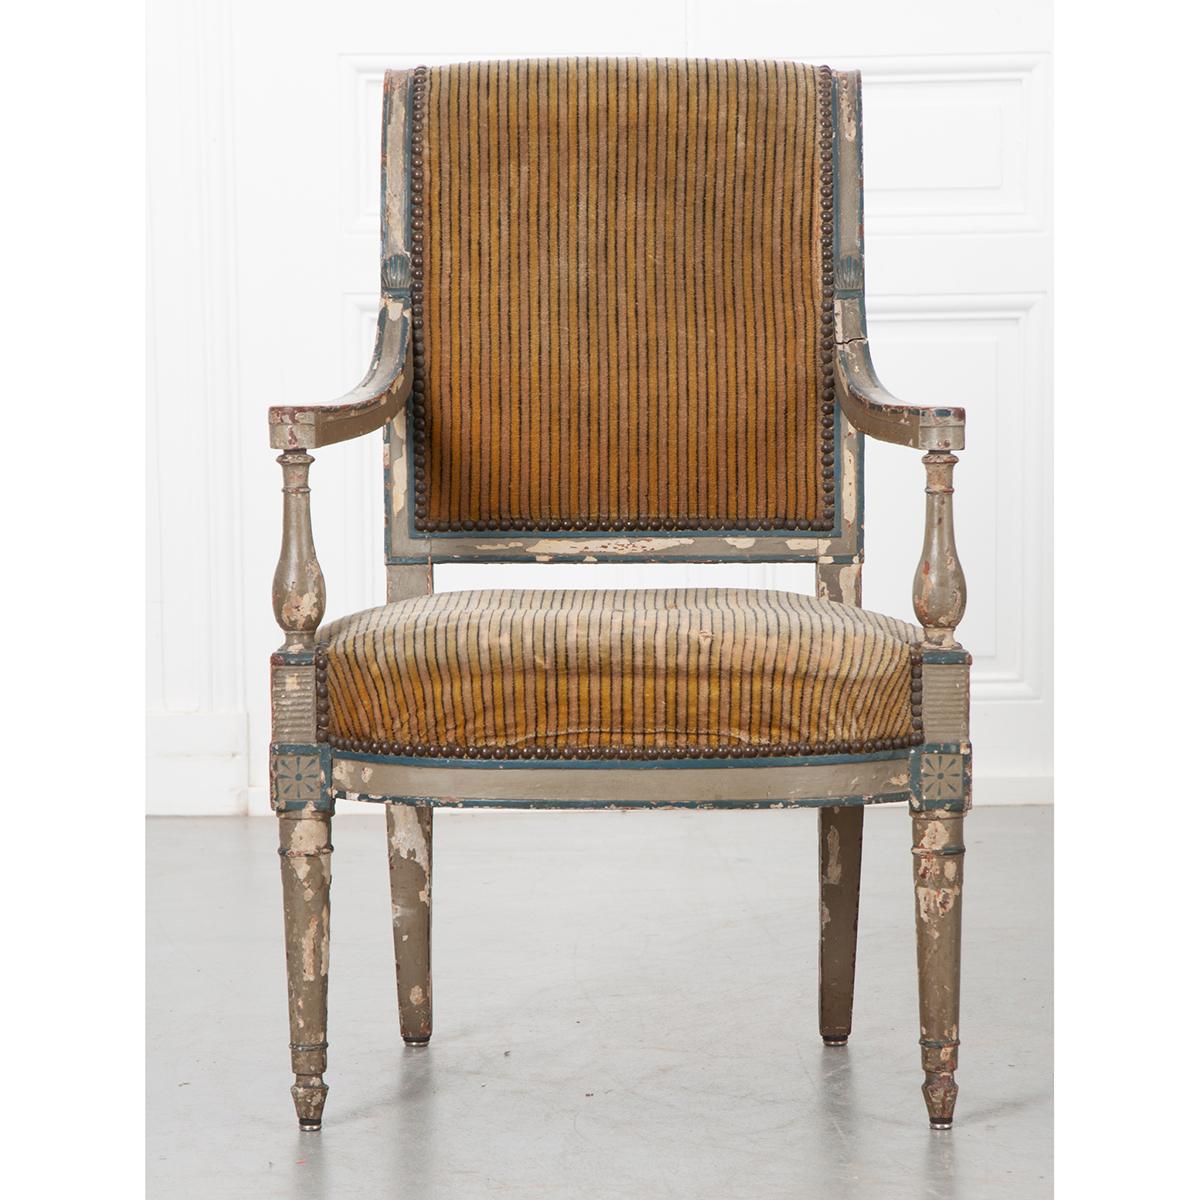 This is a French 19th century painted Directoire fauteuil with its original French blue and gray painted finish and upholstery. Be sure to view the detailed images as it shows the chairs true condition. The chair is sturdy and ready for your choice